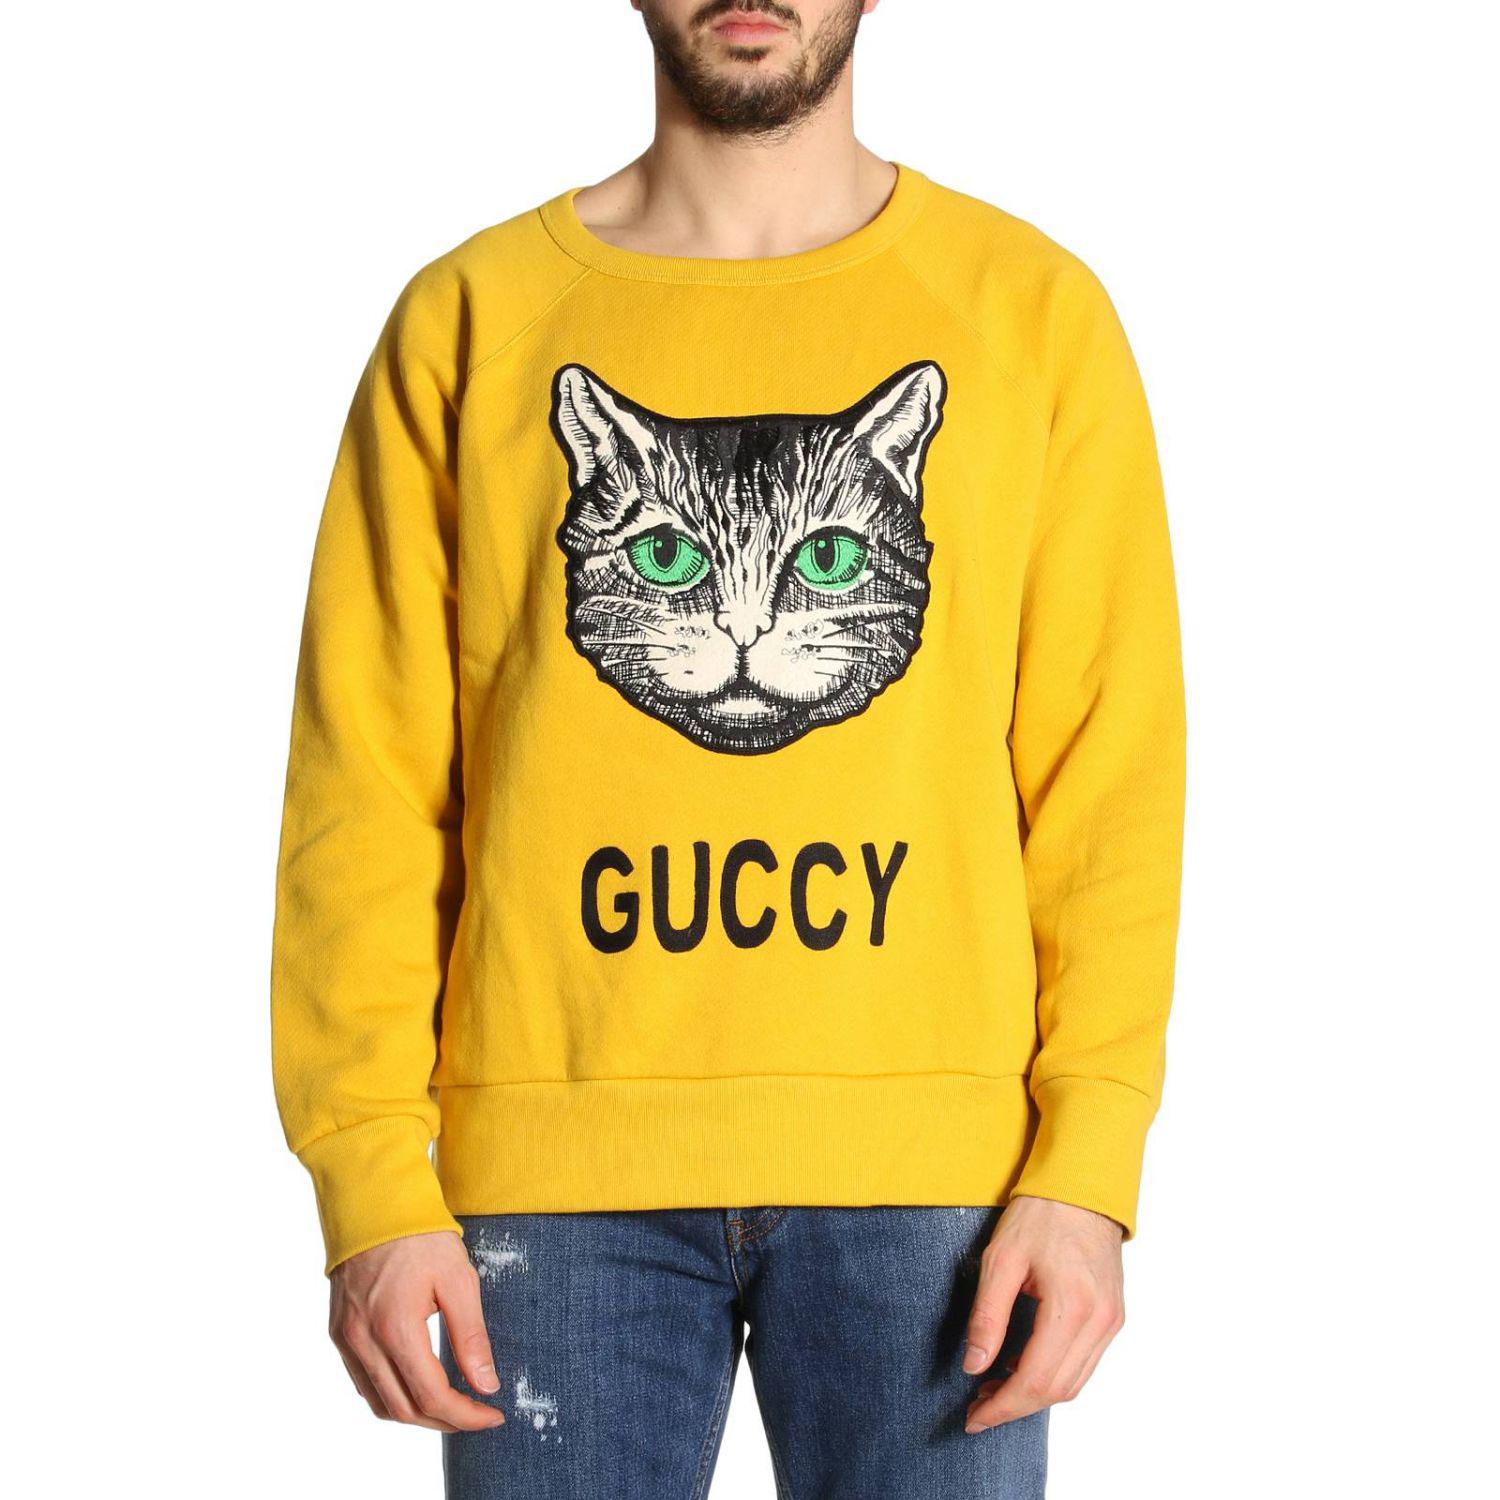 Gucci Cotton Sweater Men in Yellow for 